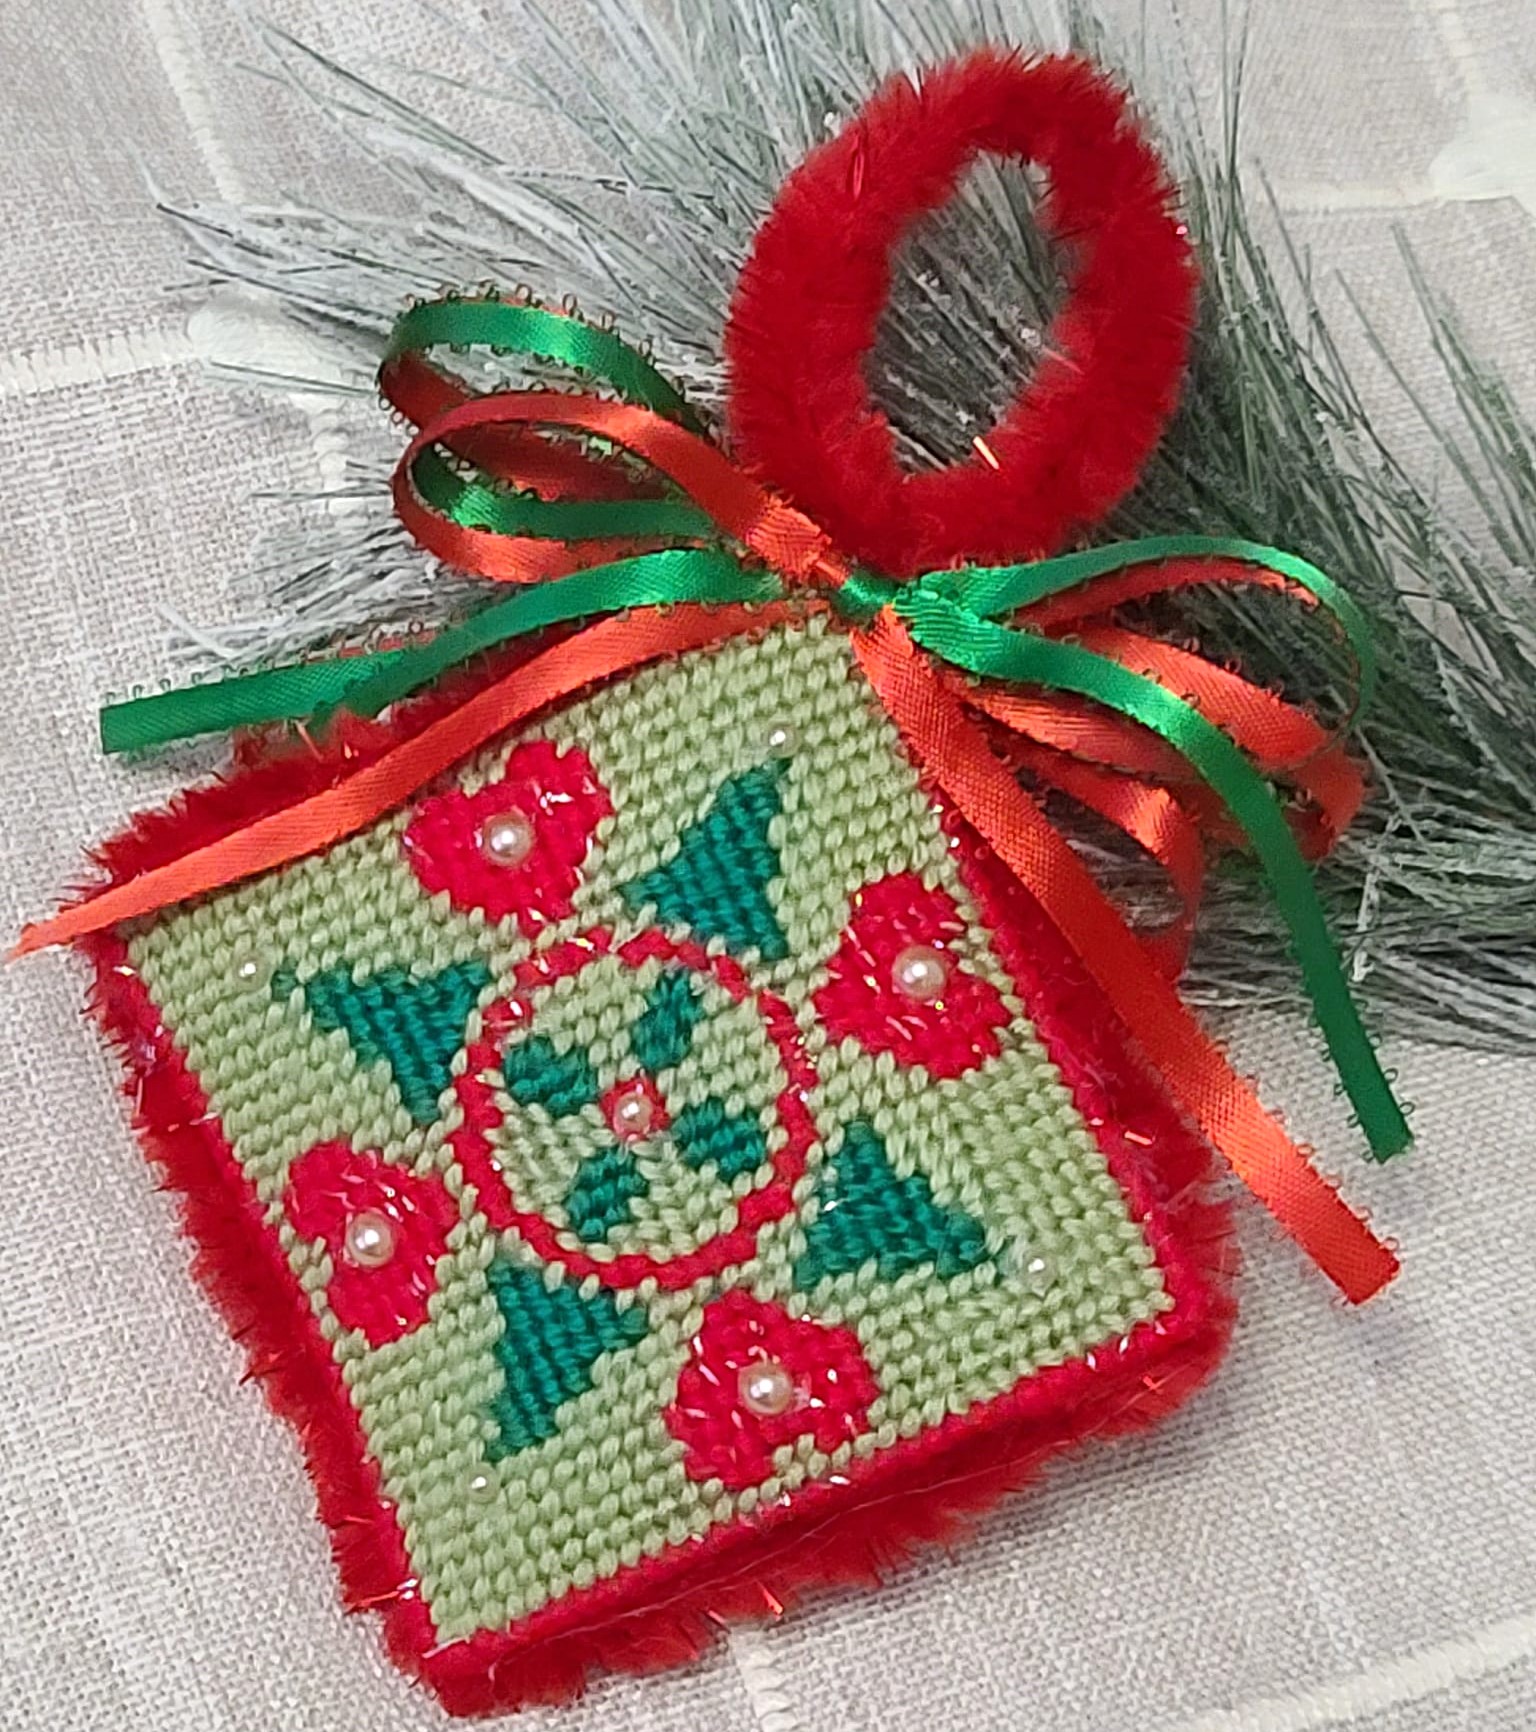 Needlepoint heart and evergreen trees hanger ornament - Click Image to Close